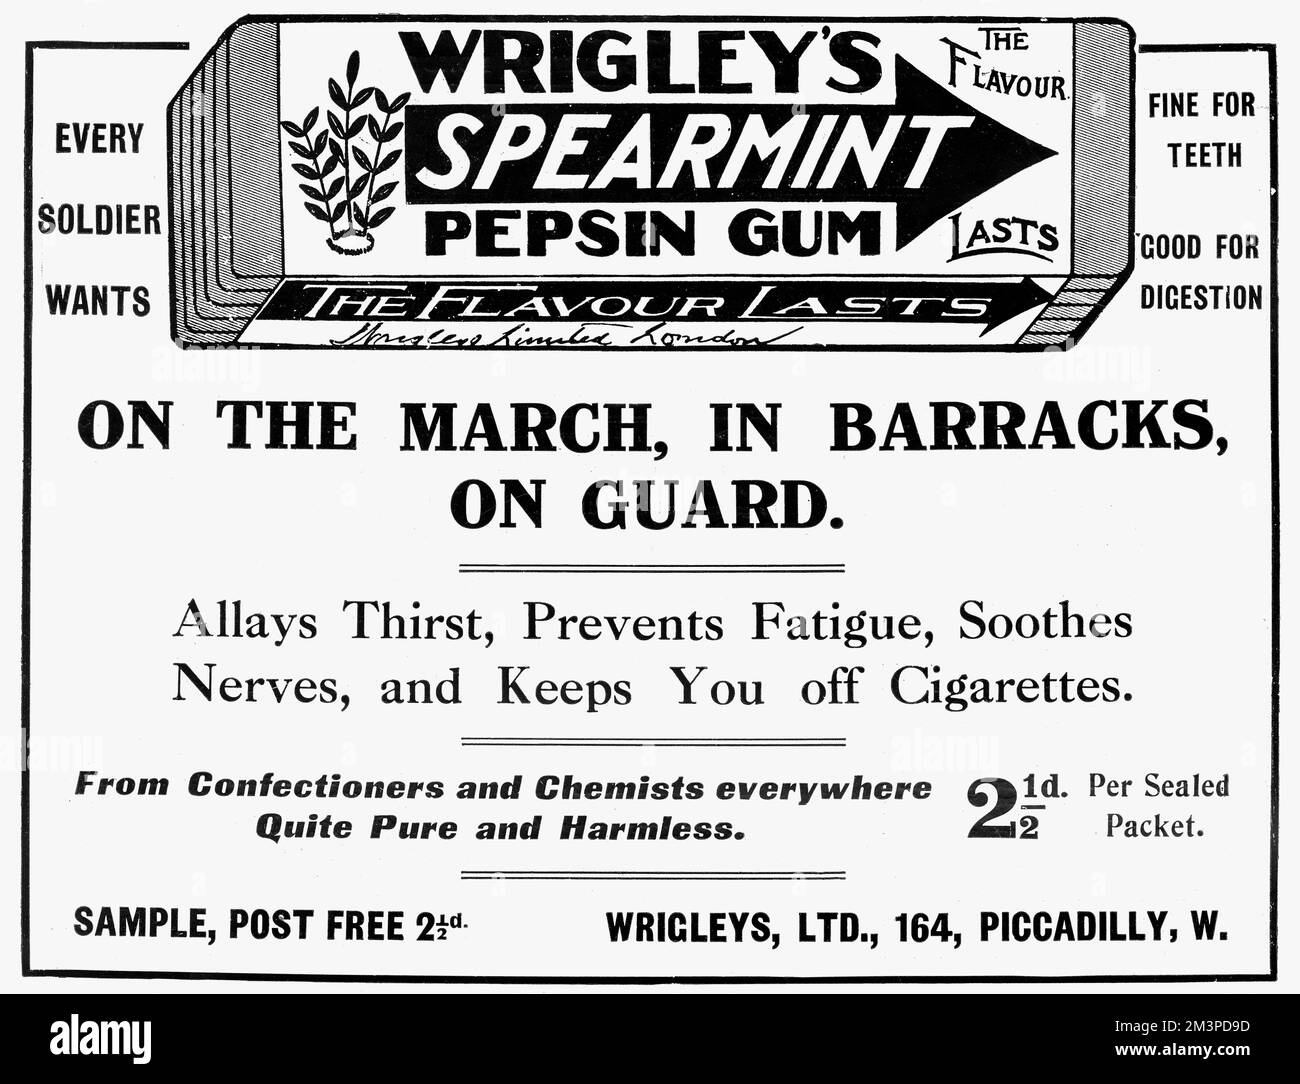 Great War period advertisement for Wrigley's spearmint pepsin gum, aimed here at soldiers, 'on the march, in barracks, on guard'.  The manufacturers claim the gum, 'allays thirst, prevents fatigue, soothes nerves, and keeps you off cigarettes.'  1914 Stock Photo